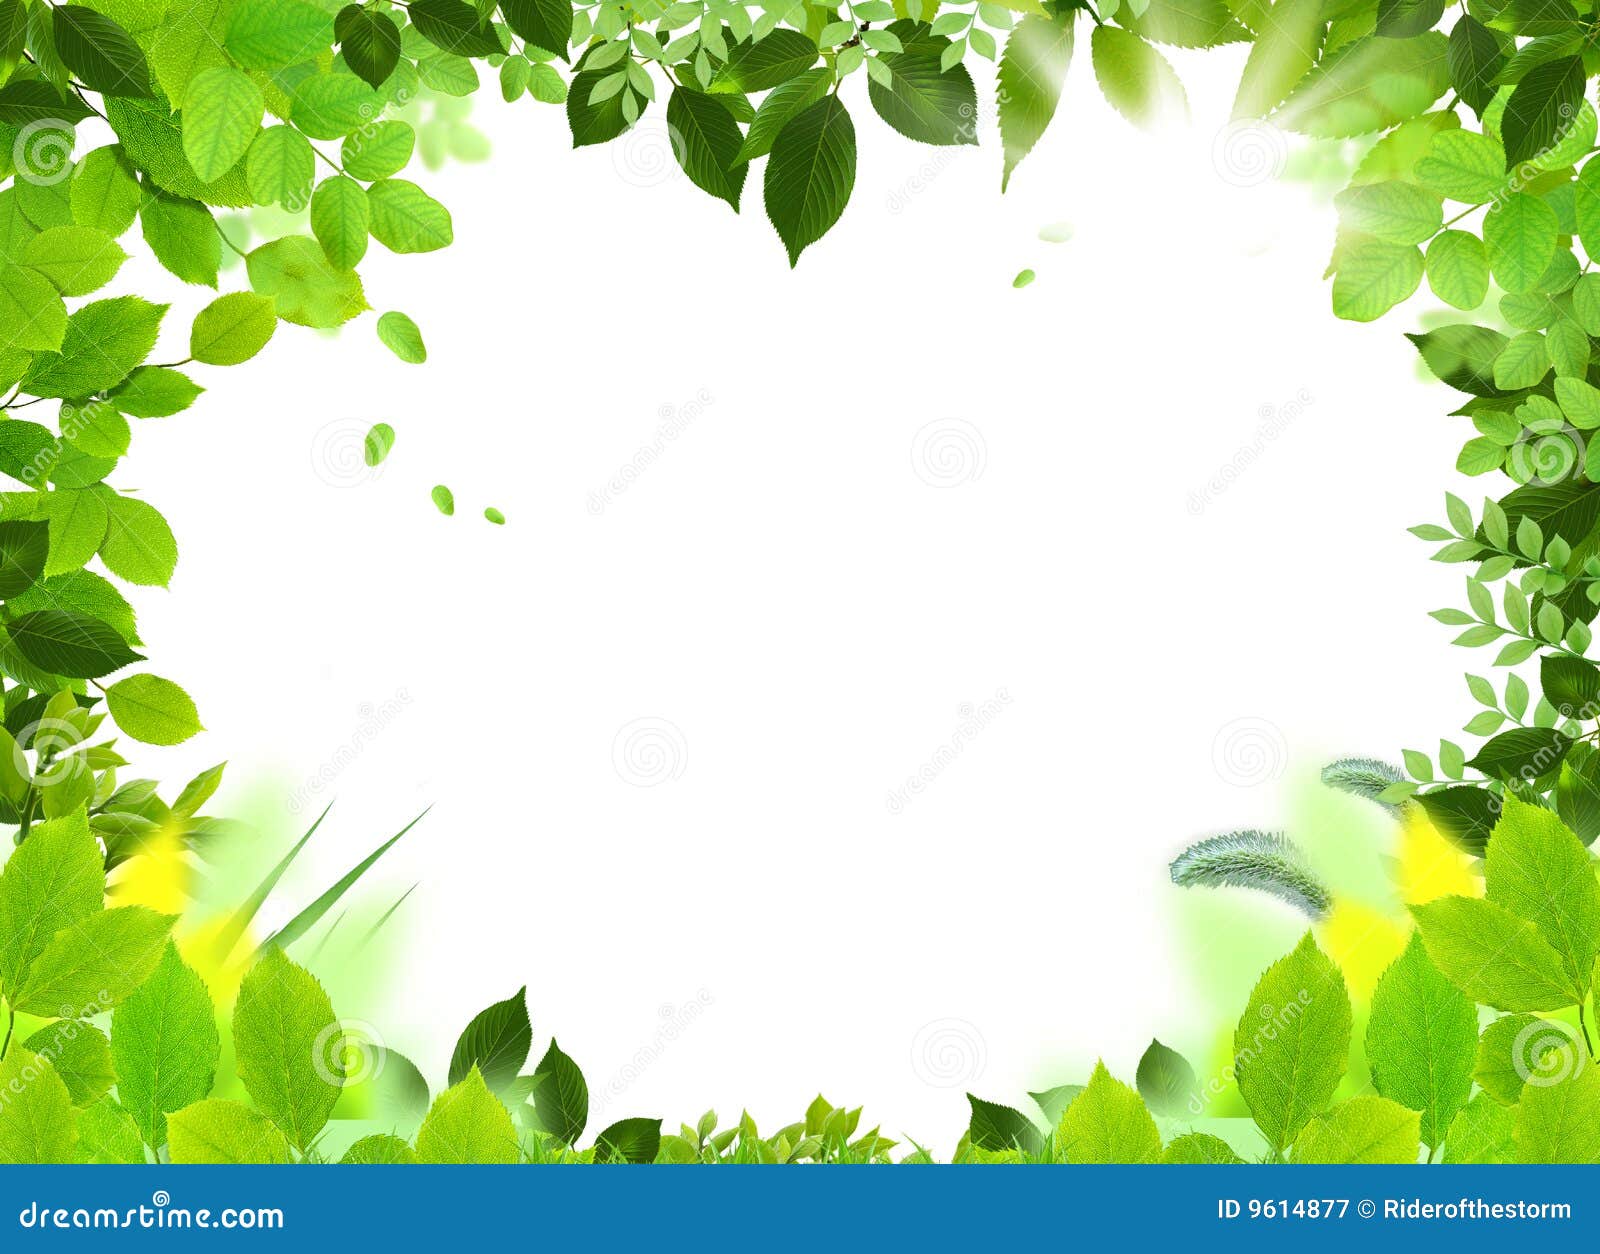 nature photography clipart - photo #20